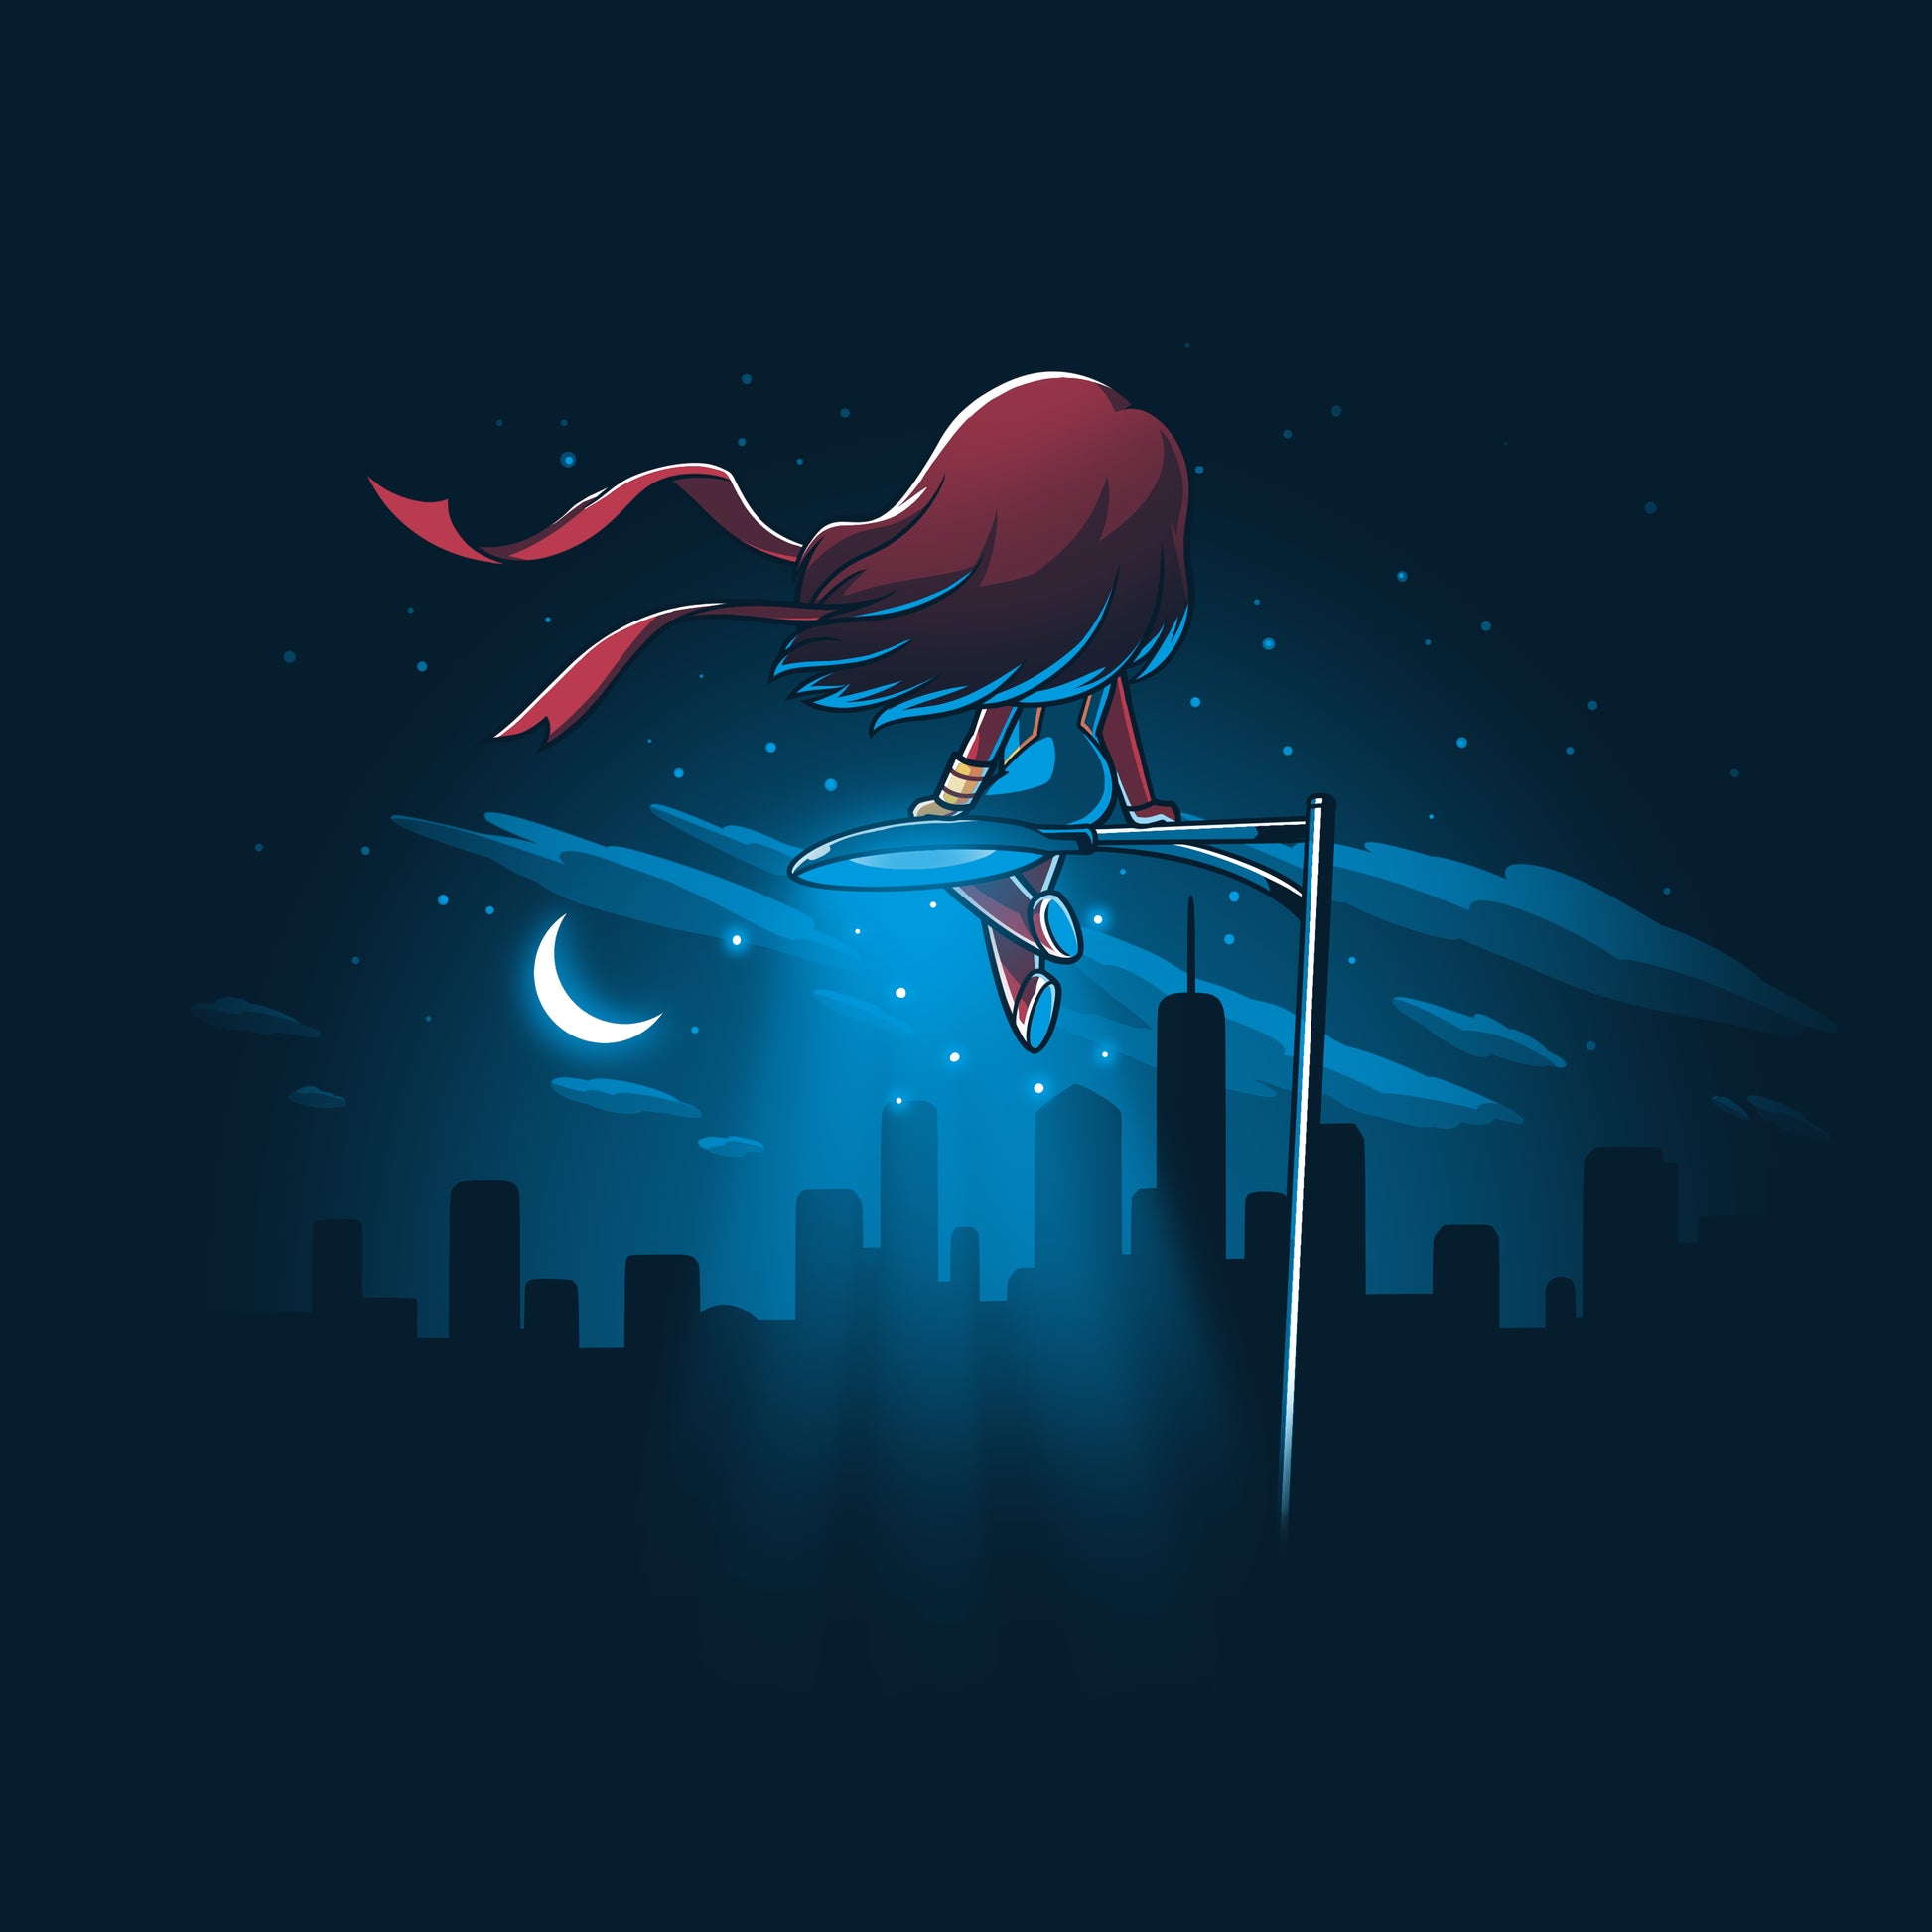 An officially licensed Ms. Marvel T-shirt featuring Ms. Marvel's City View riding a bike on a city street at night.